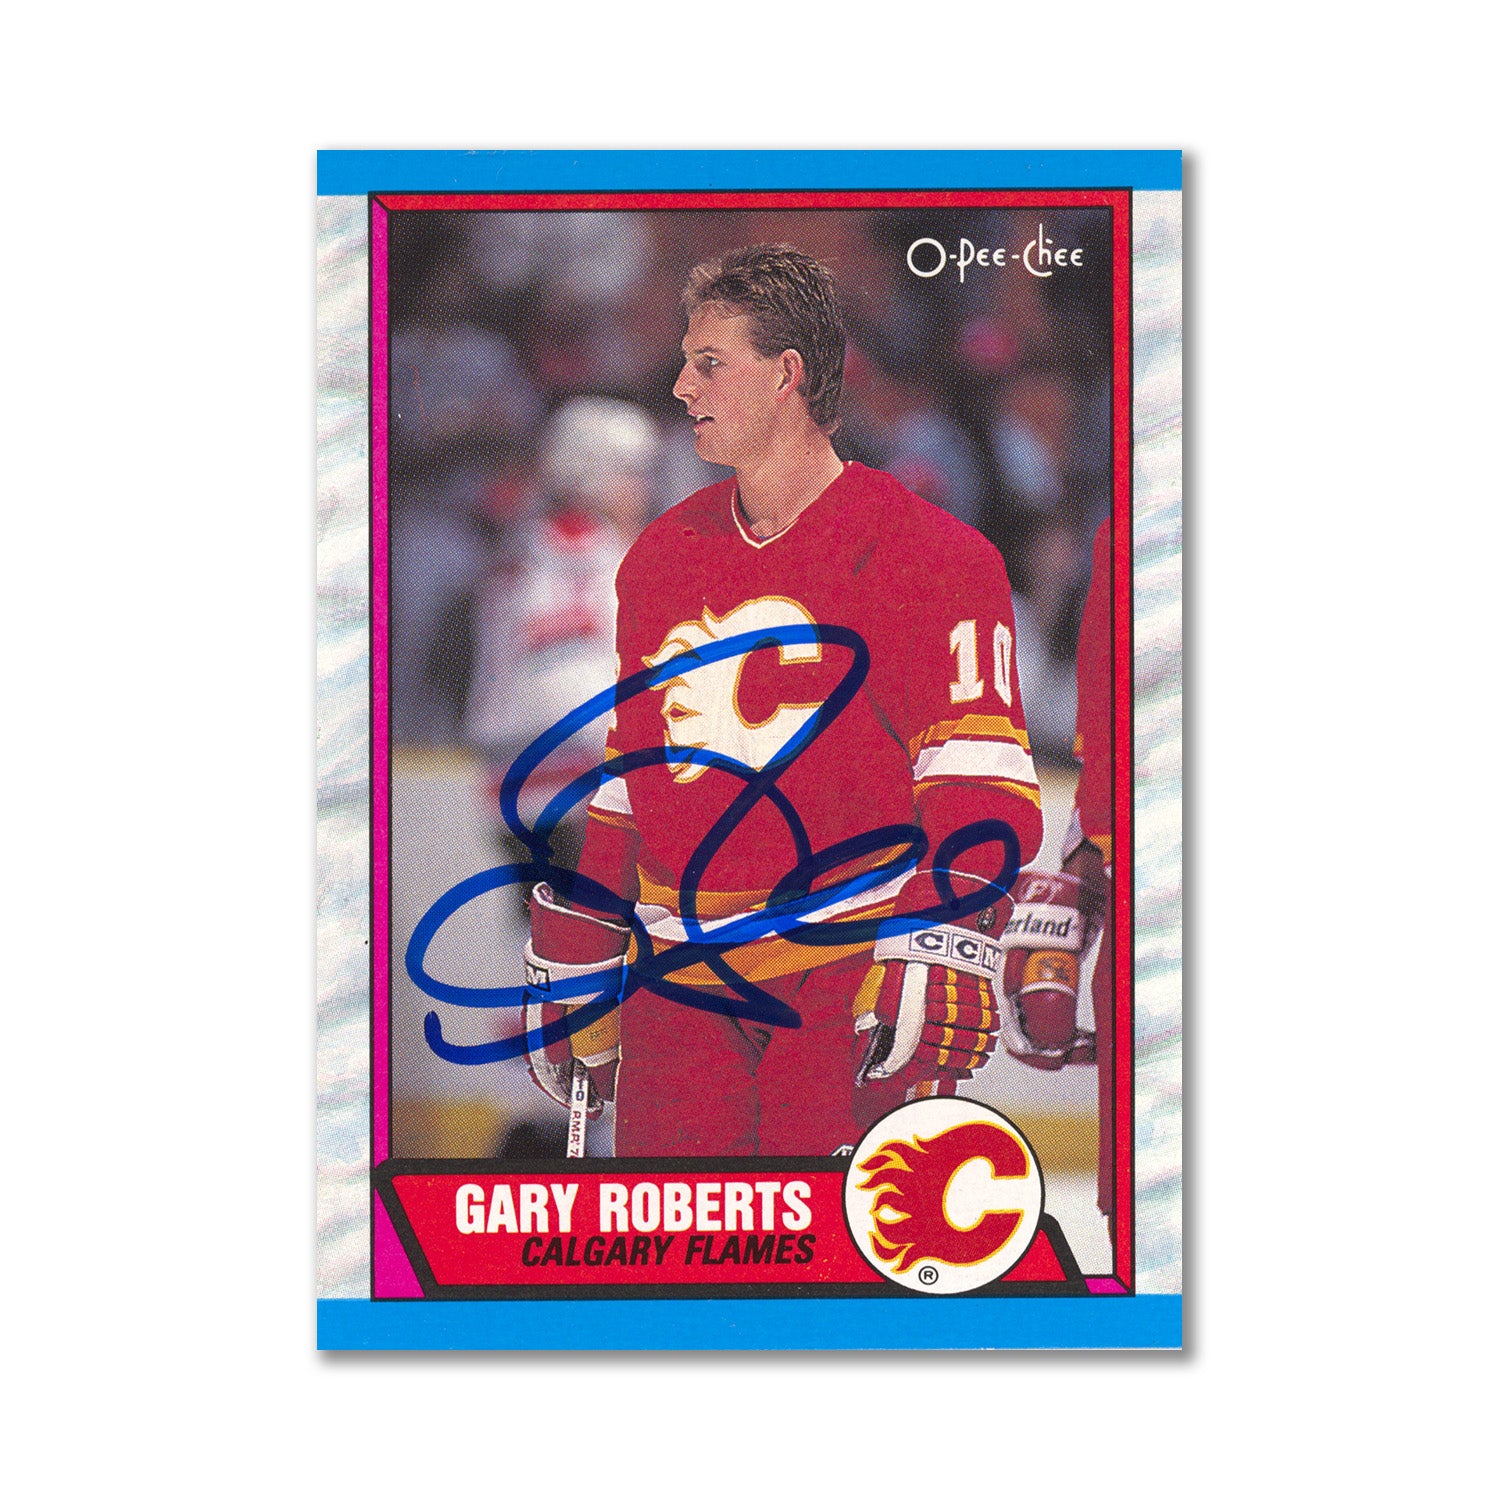 Autographed 1989-90 O-Pee-Chee #202 Gary Roberts Rookie Card